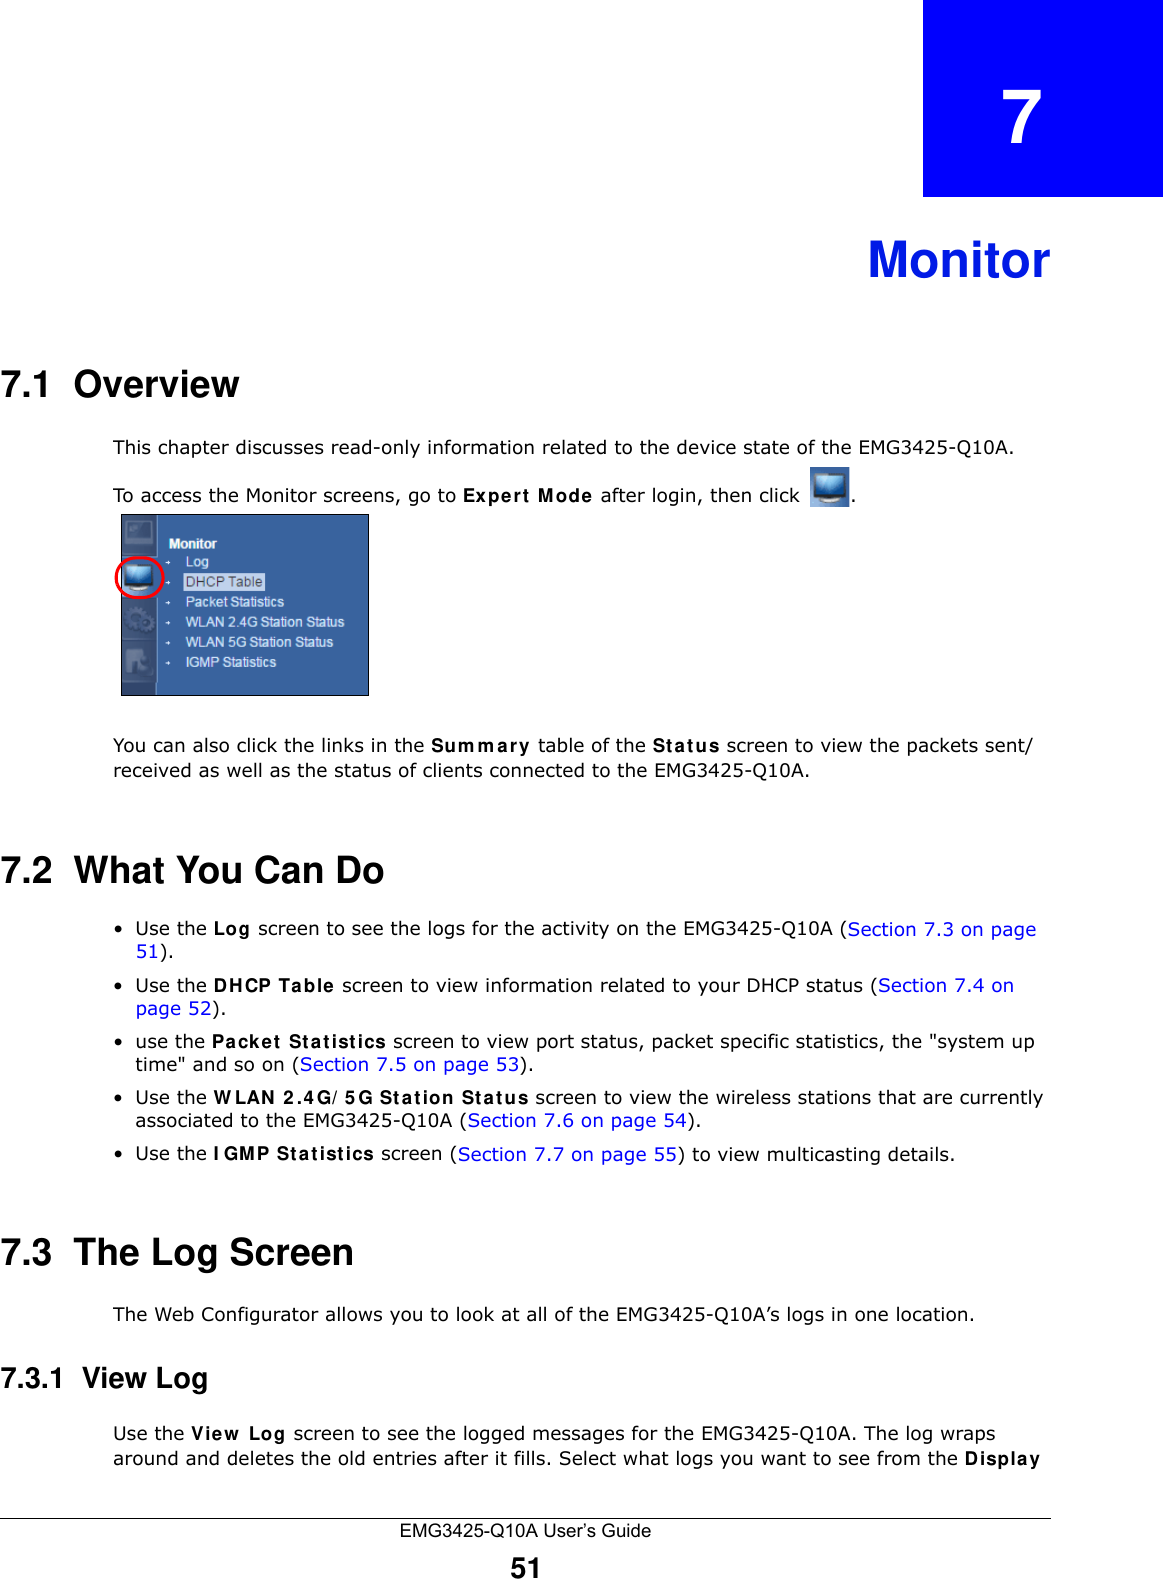 EMG3425-Q10A User’s Guide51CHAPTER   7Monitor7.1  OverviewThis chapter discusses read-only information related to the device state of the EMG3425-Q10A. To access the Monitor screens, go to Ex per t  M ode after login, then click  .  You can also click the links in the Sum m ary table of the St a t u s screen to view the packets sent/received as well as the status of clients connected to the EMG3425-Q10A.7.2  What You Can Do•Use the Log screen to see the logs for the activity on the EMG3425-Q10A (Section 7.3 on page 51).•Use the DHCP Table screen to view information related to your DHCP status (Section 7.4 on page 52).•use the Pa cke t  St a t ist ics screen to view port status, packet specific statistics, the &quot;system up time&quot; and so on (Section 7.5 on page 53).•Use the W LAN 2 .4 G/ 5 G St at ion Sta t us screen to view the wireless stations that are currently associated to the EMG3425-Q10A (Section 7.6 on page 54).•Use the I GM P Stat ist ics screen (Section 7.7 on page 55) to view multicasting details.7.3  The Log ScreenThe Web Configurator allows you to look at all of the EMG3425-Q10A’s logs in one location.7.3.1  View LogUse the Vie w  Log screen to see the logged messages for the EMG3425-Q10A. The log wraps around and deletes the old entries after it fills. Select what logs you want to see from the Display 